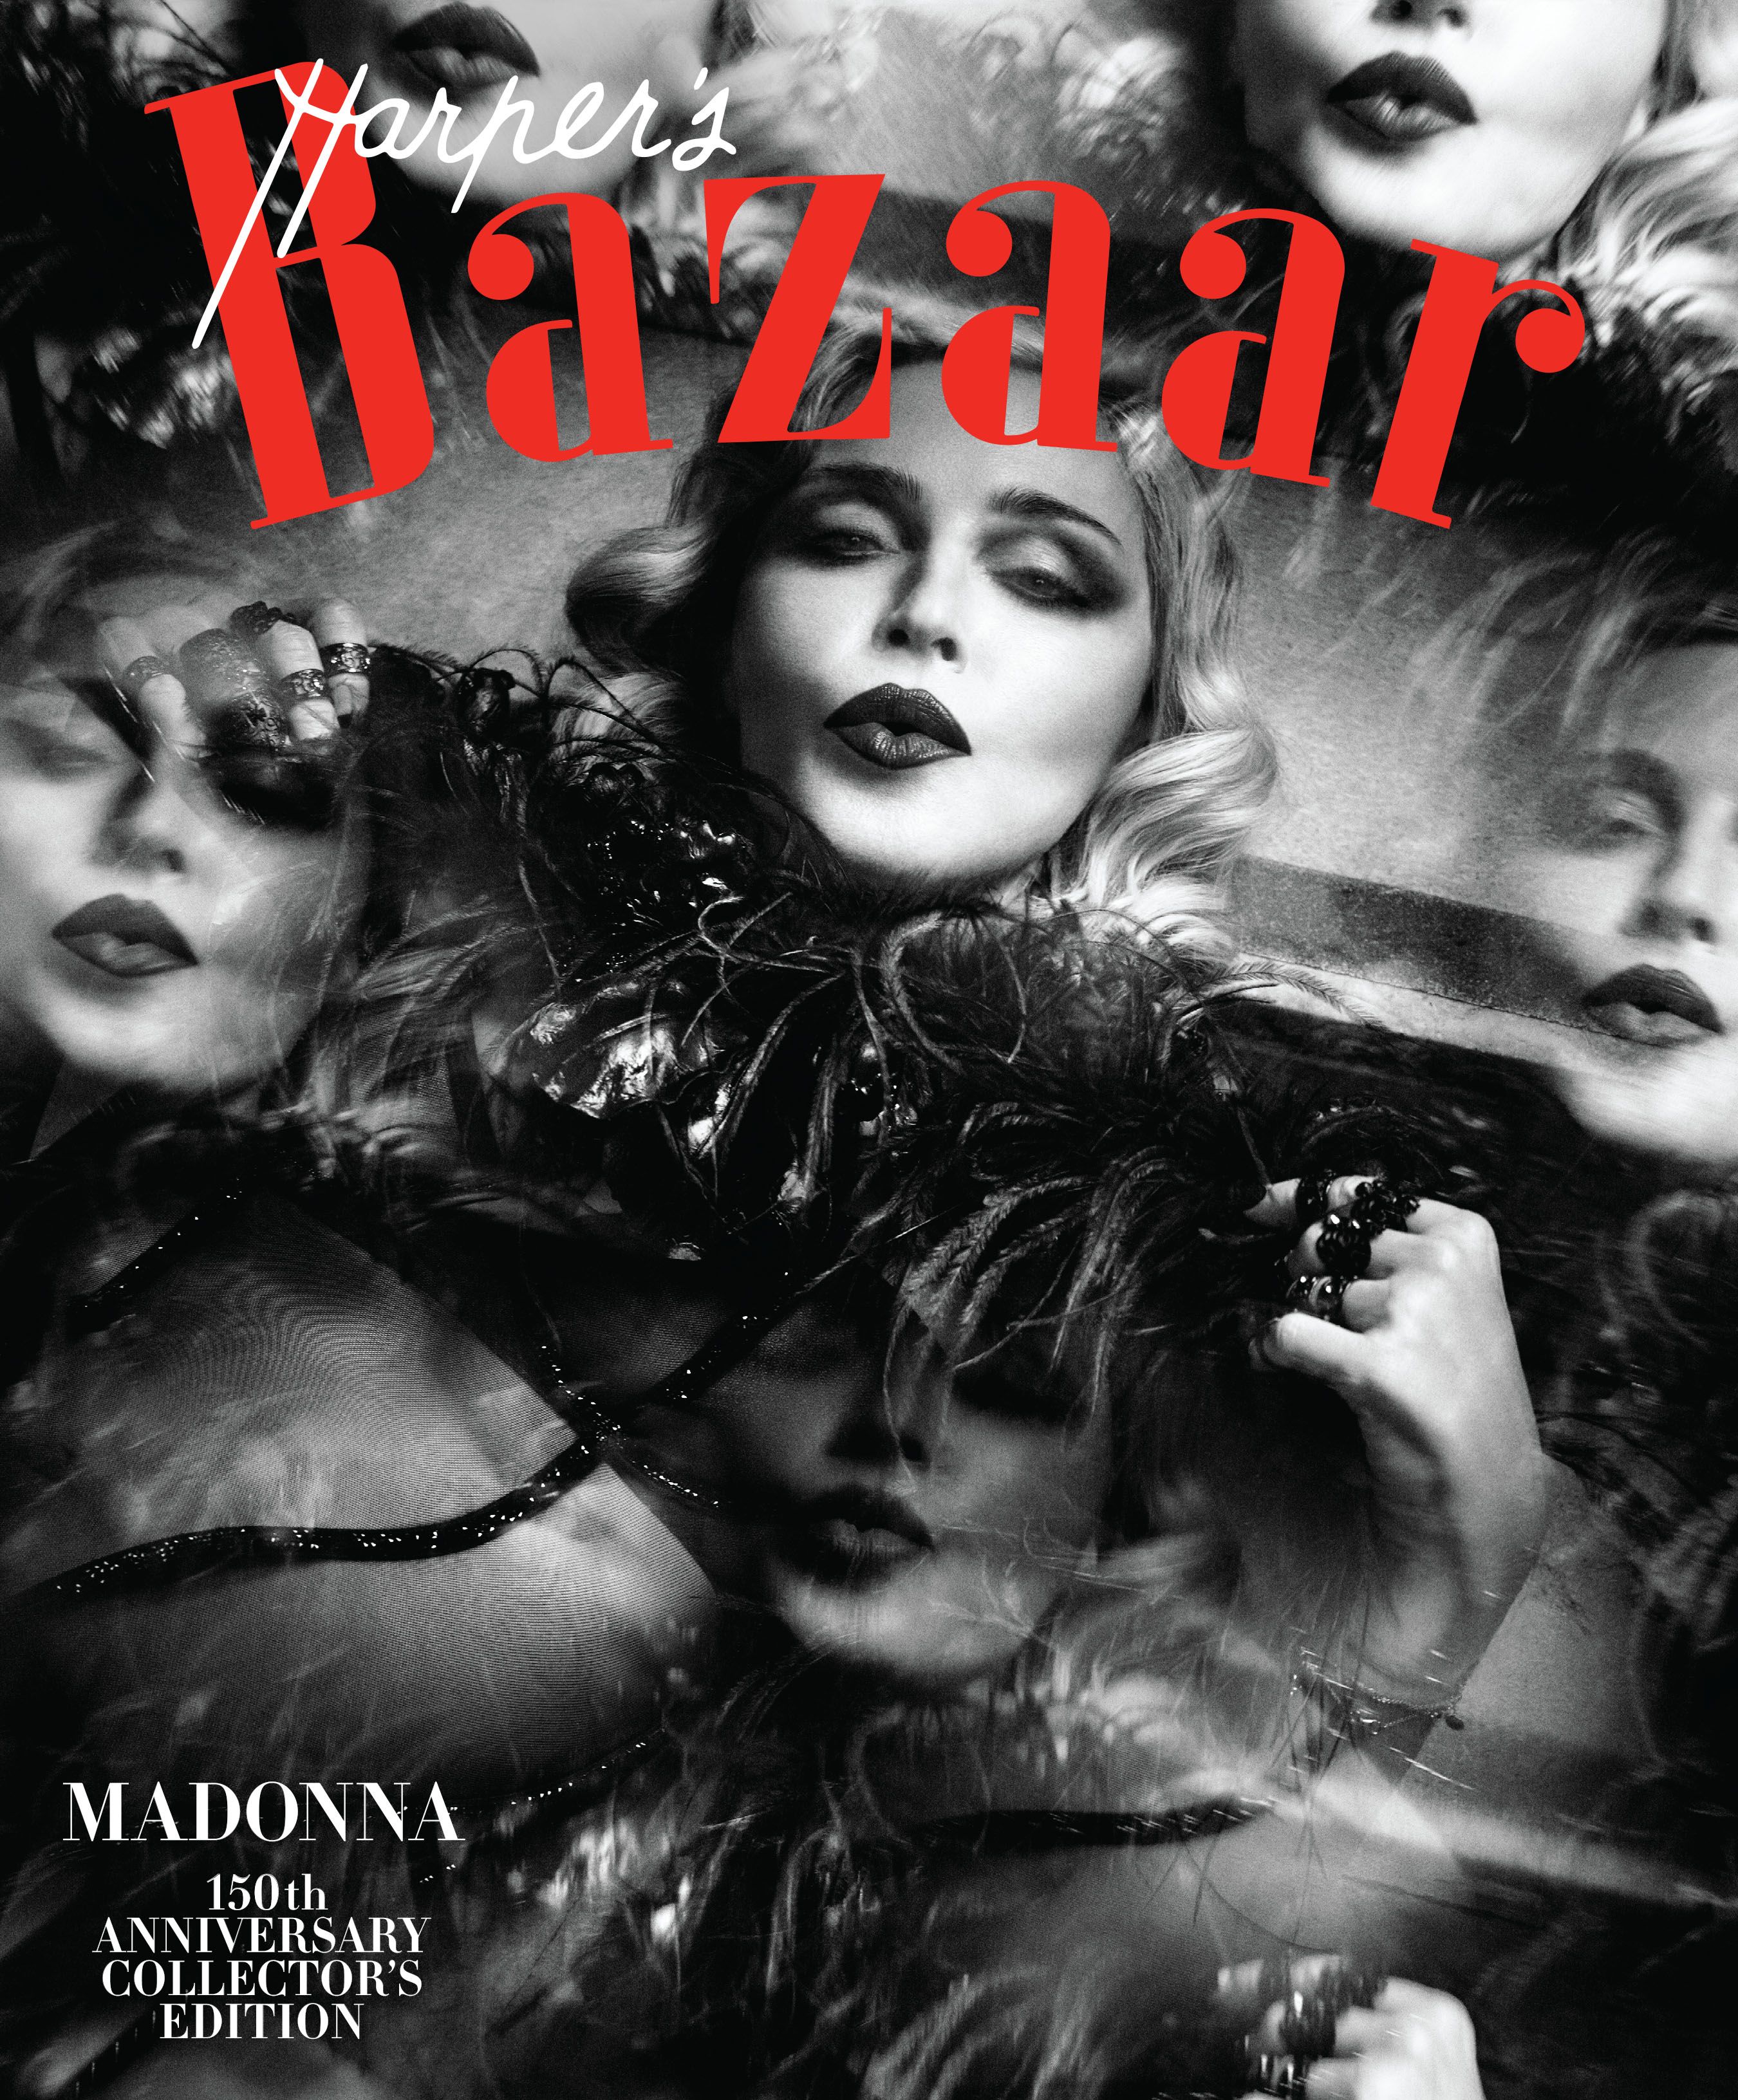 Madonna Reflects on Her Career, Her New Movie Loved, and Donald Trump -  Madonna Cover Story Interview